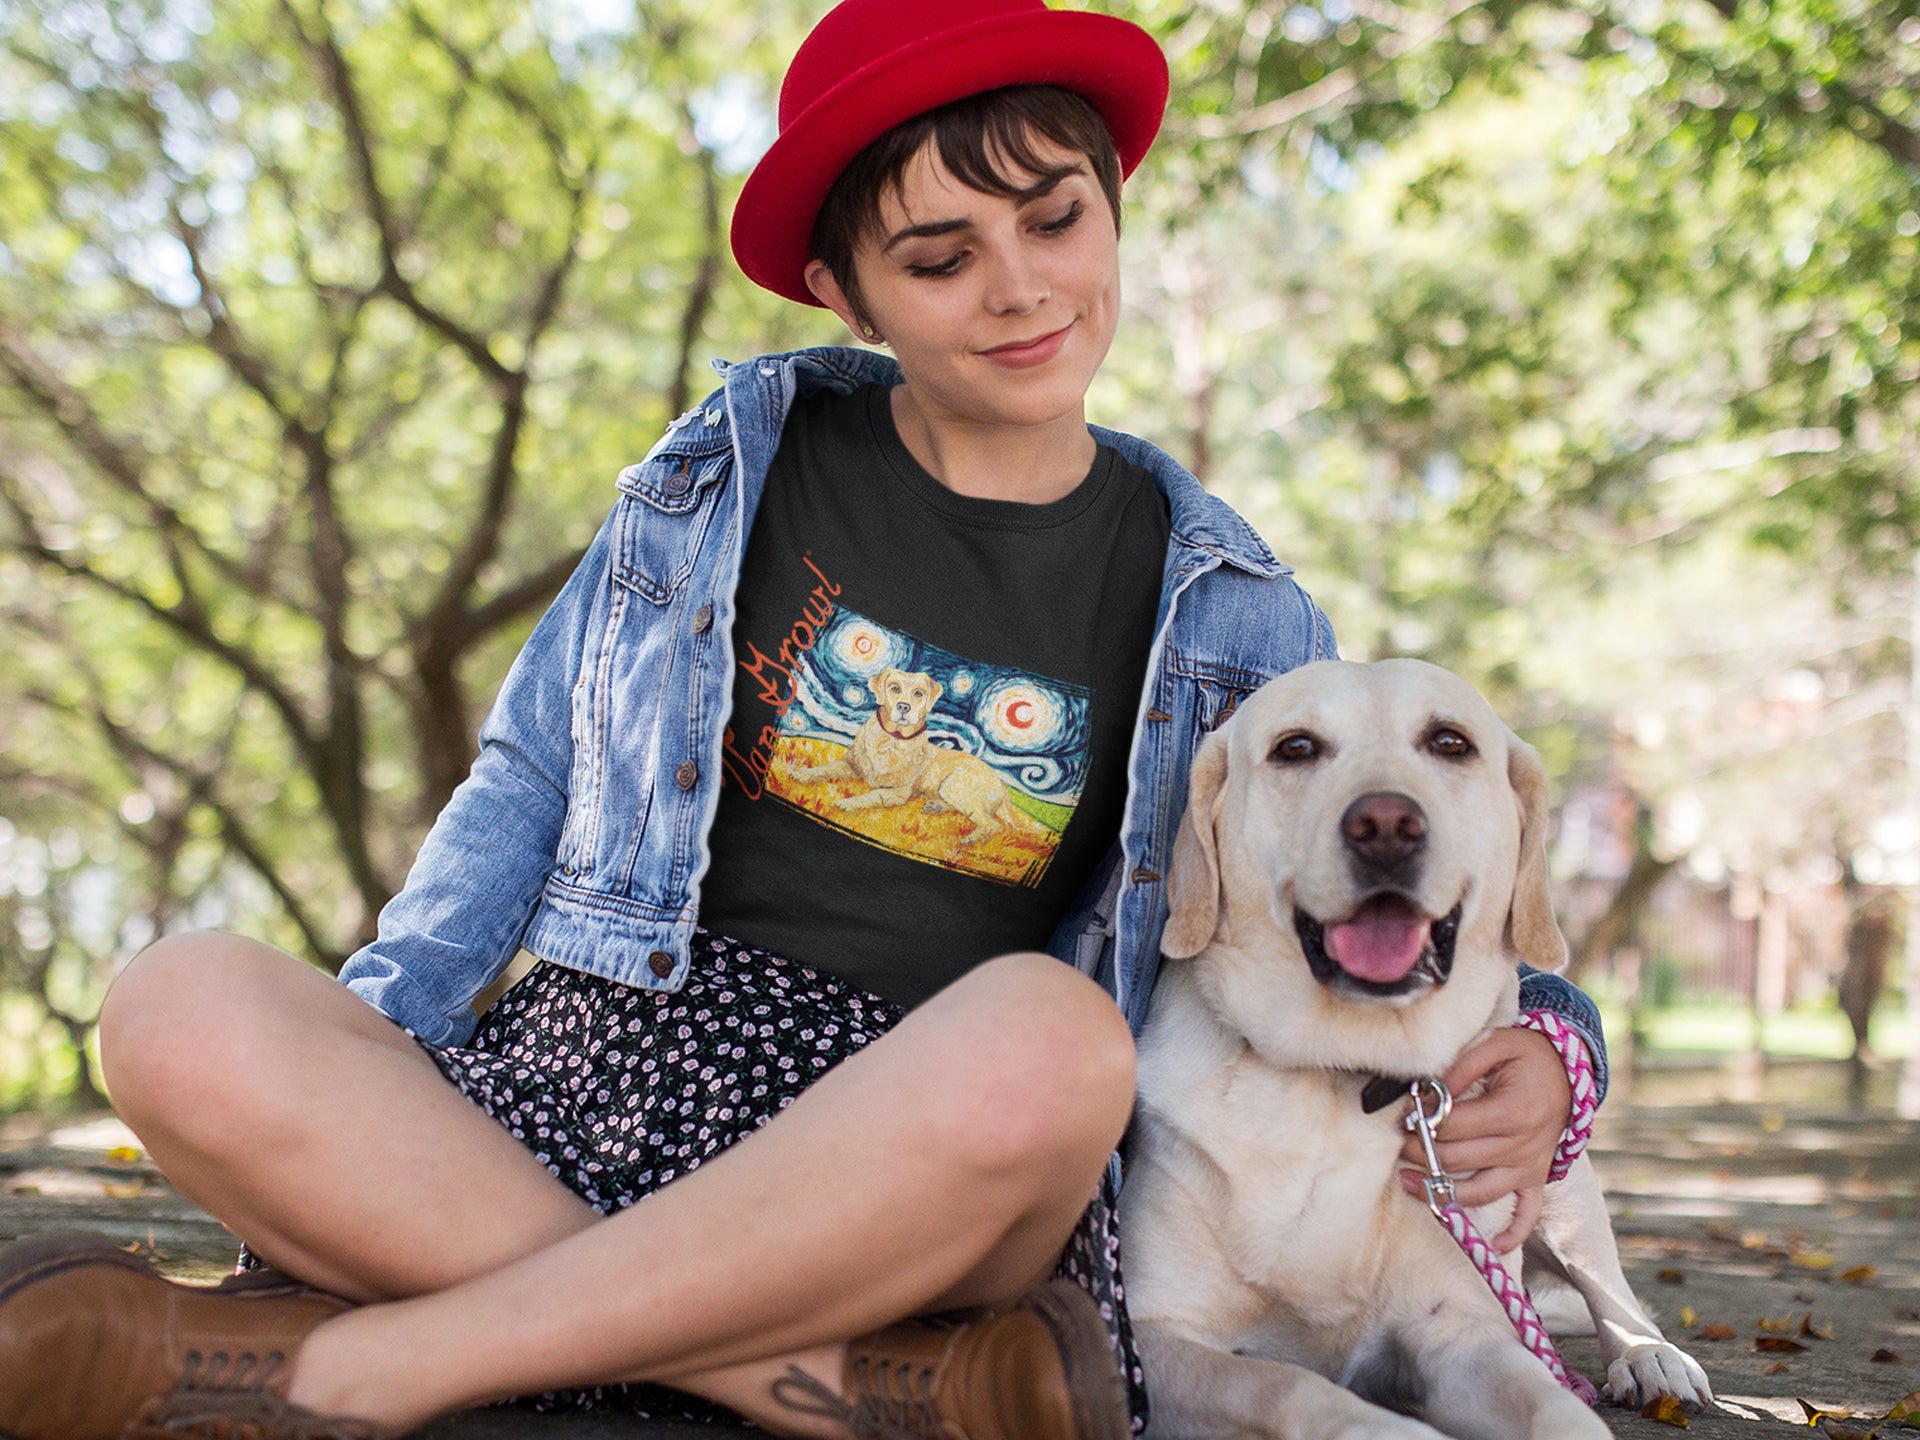 Girl wearing a red hat and a dog art t-shirt inspired by Van Gogh sitting with a Yellow Labrador.